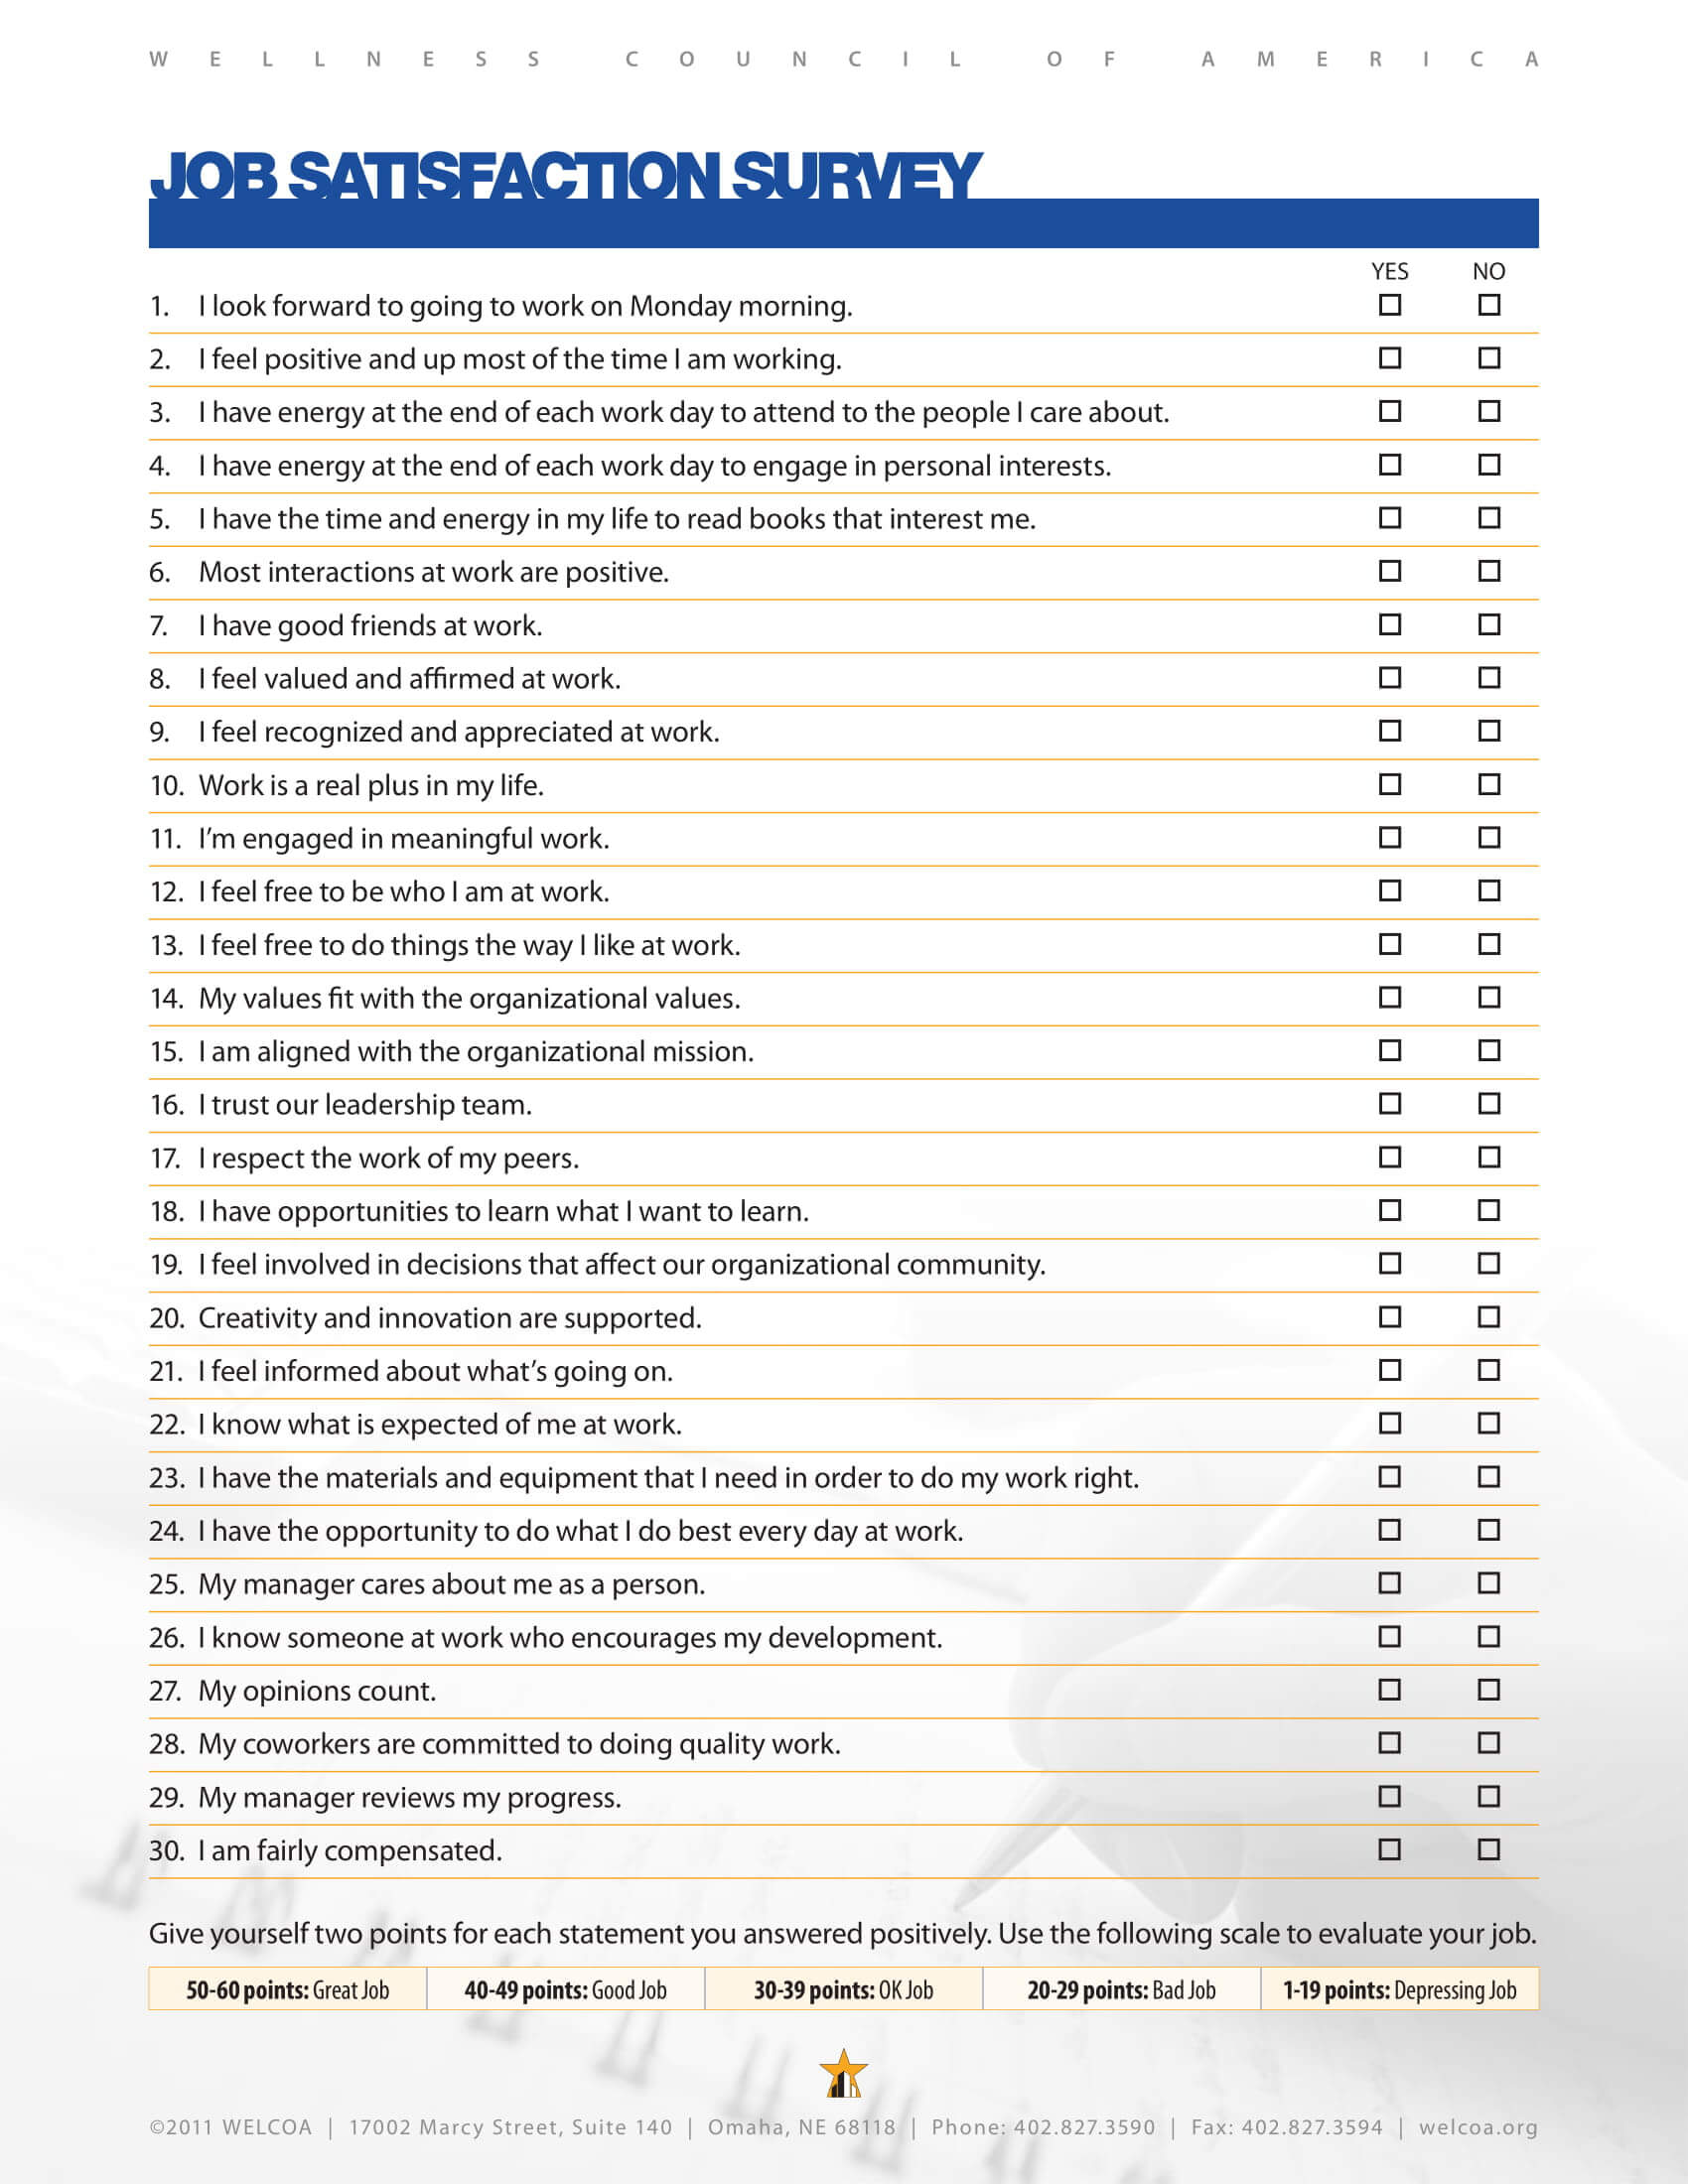 14+ Employee Satisfaction Survey Form Examples - Pdf, Doc Regarding Employee Satisfaction Survey Template Word